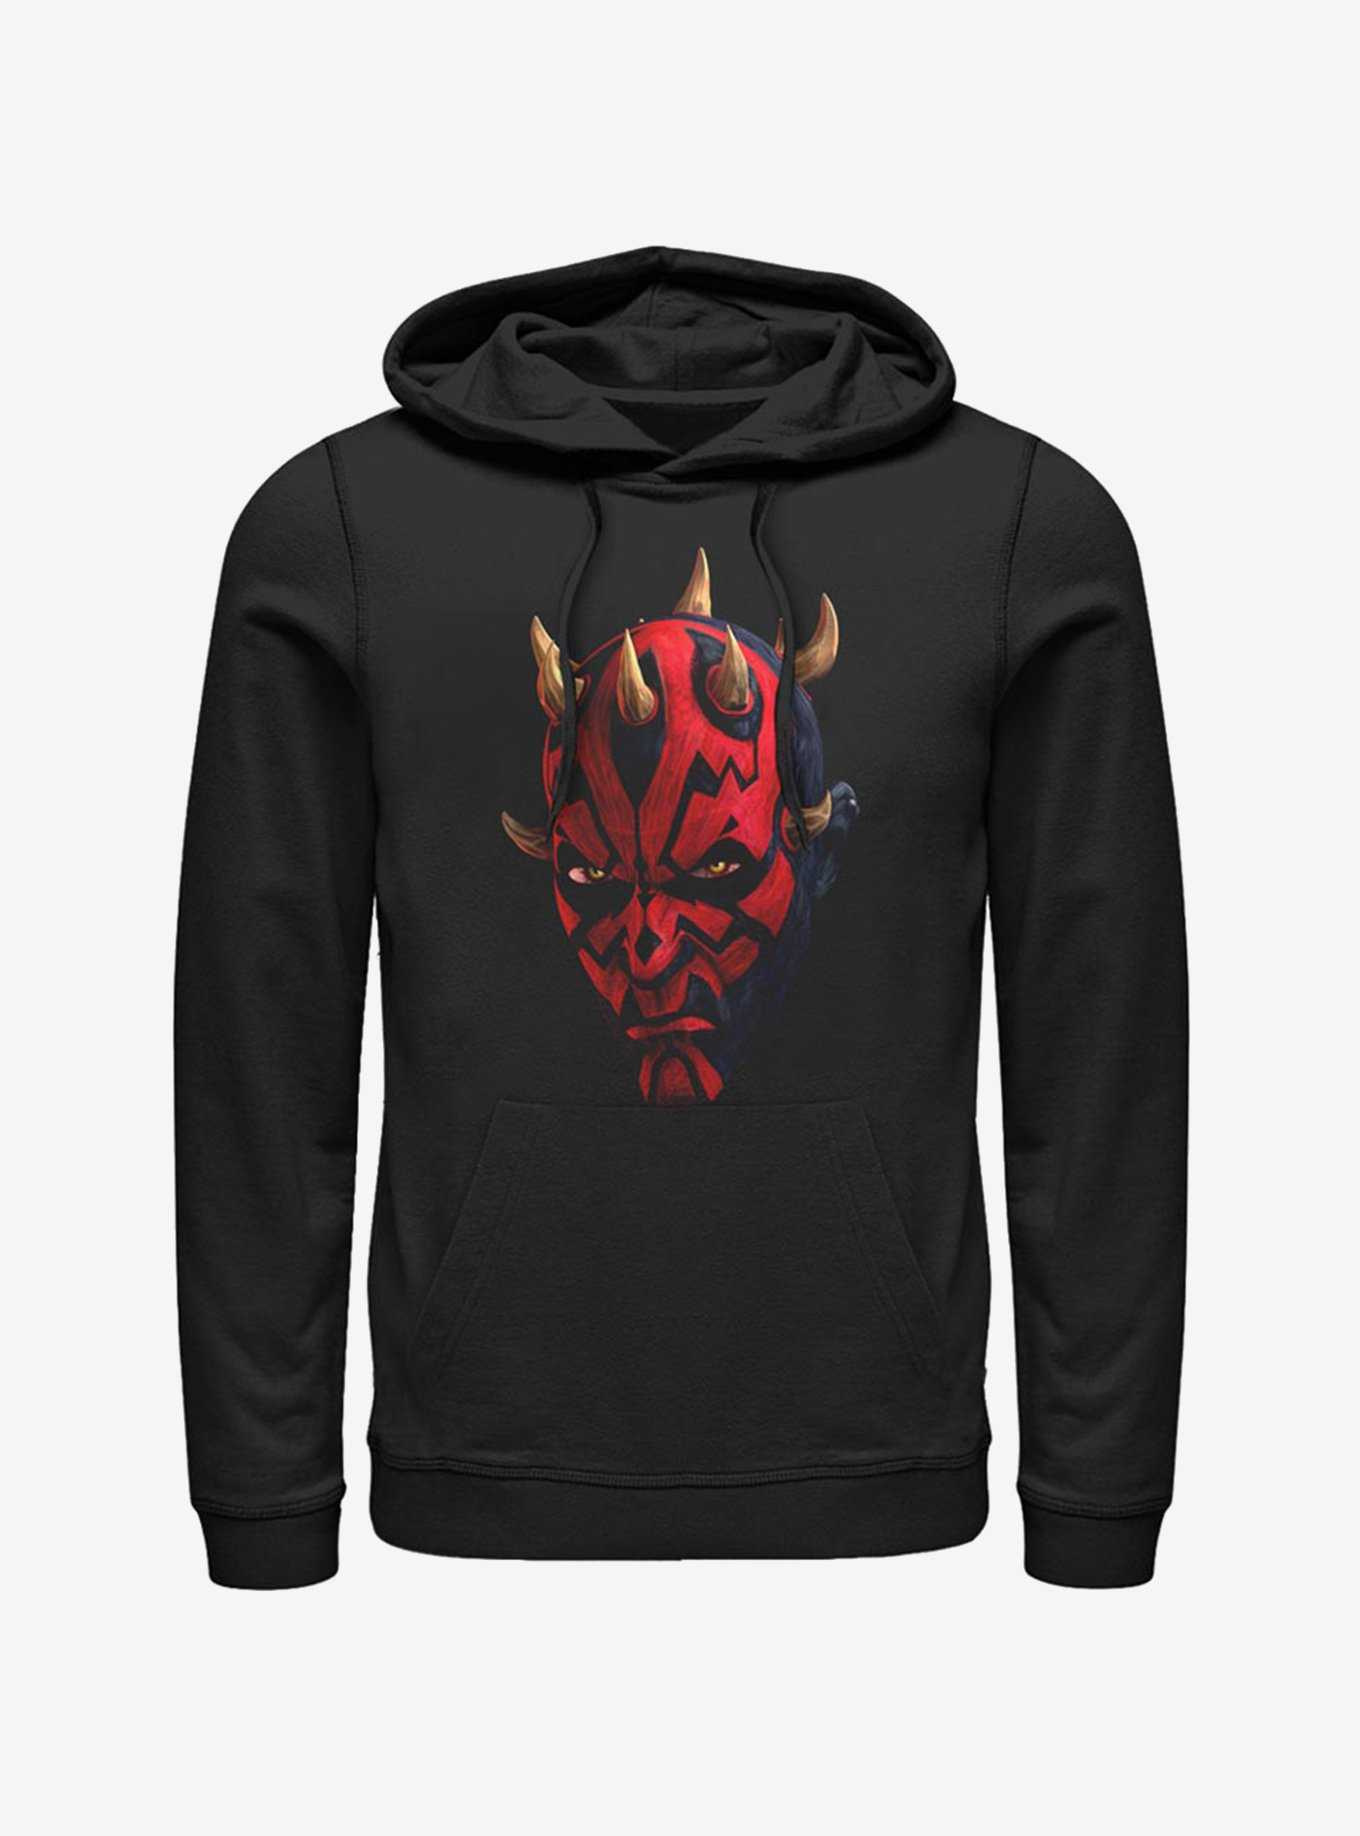 Star Wars The Clone Wars Maul Face Hoodie, , hi-res